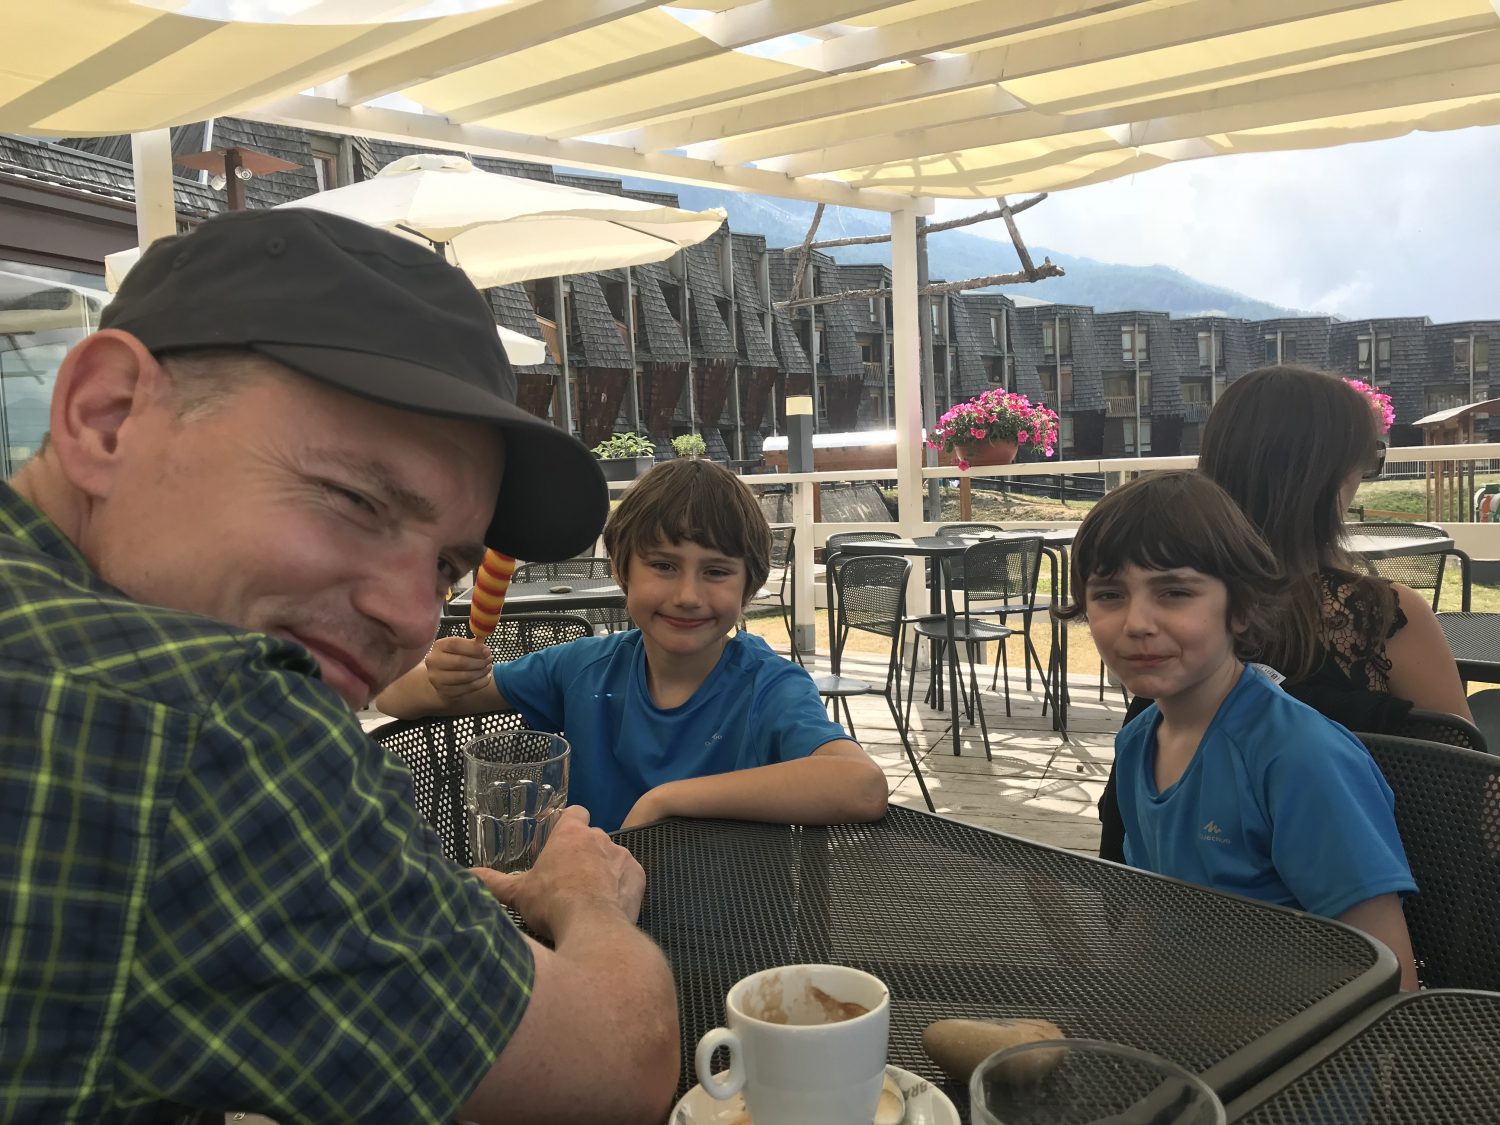 A quick coffee pit stop at the La Maison dei Maestri. Our family hike in Pila during the past summer holiday